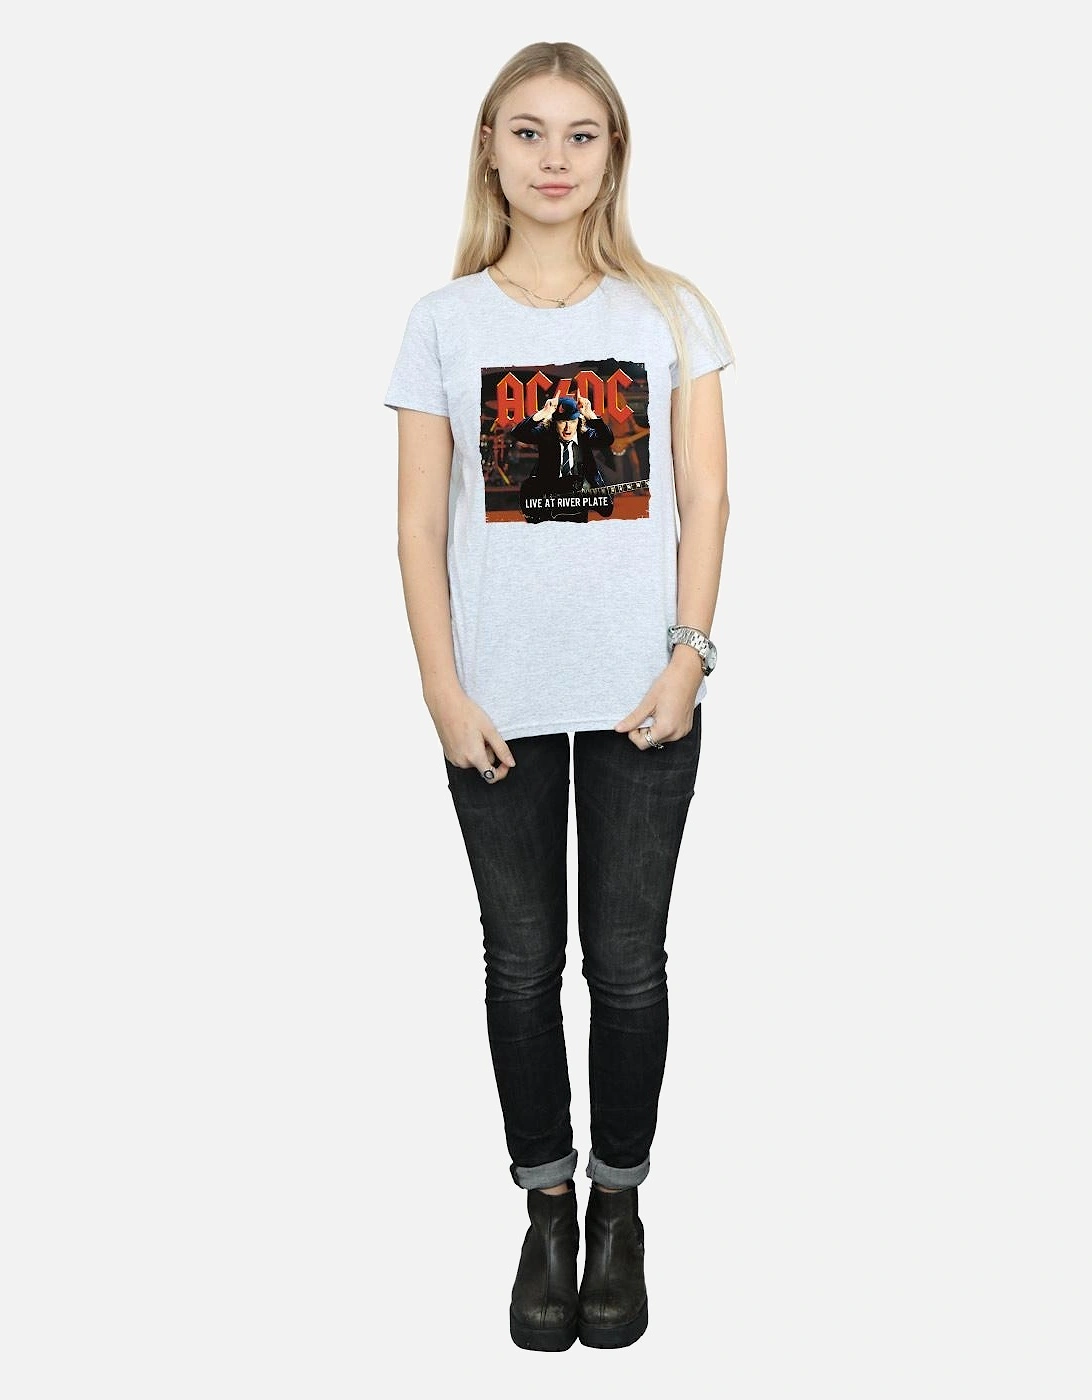 Womens/Ladies Live At River Plate Columbia Records Cotton T-Shirt